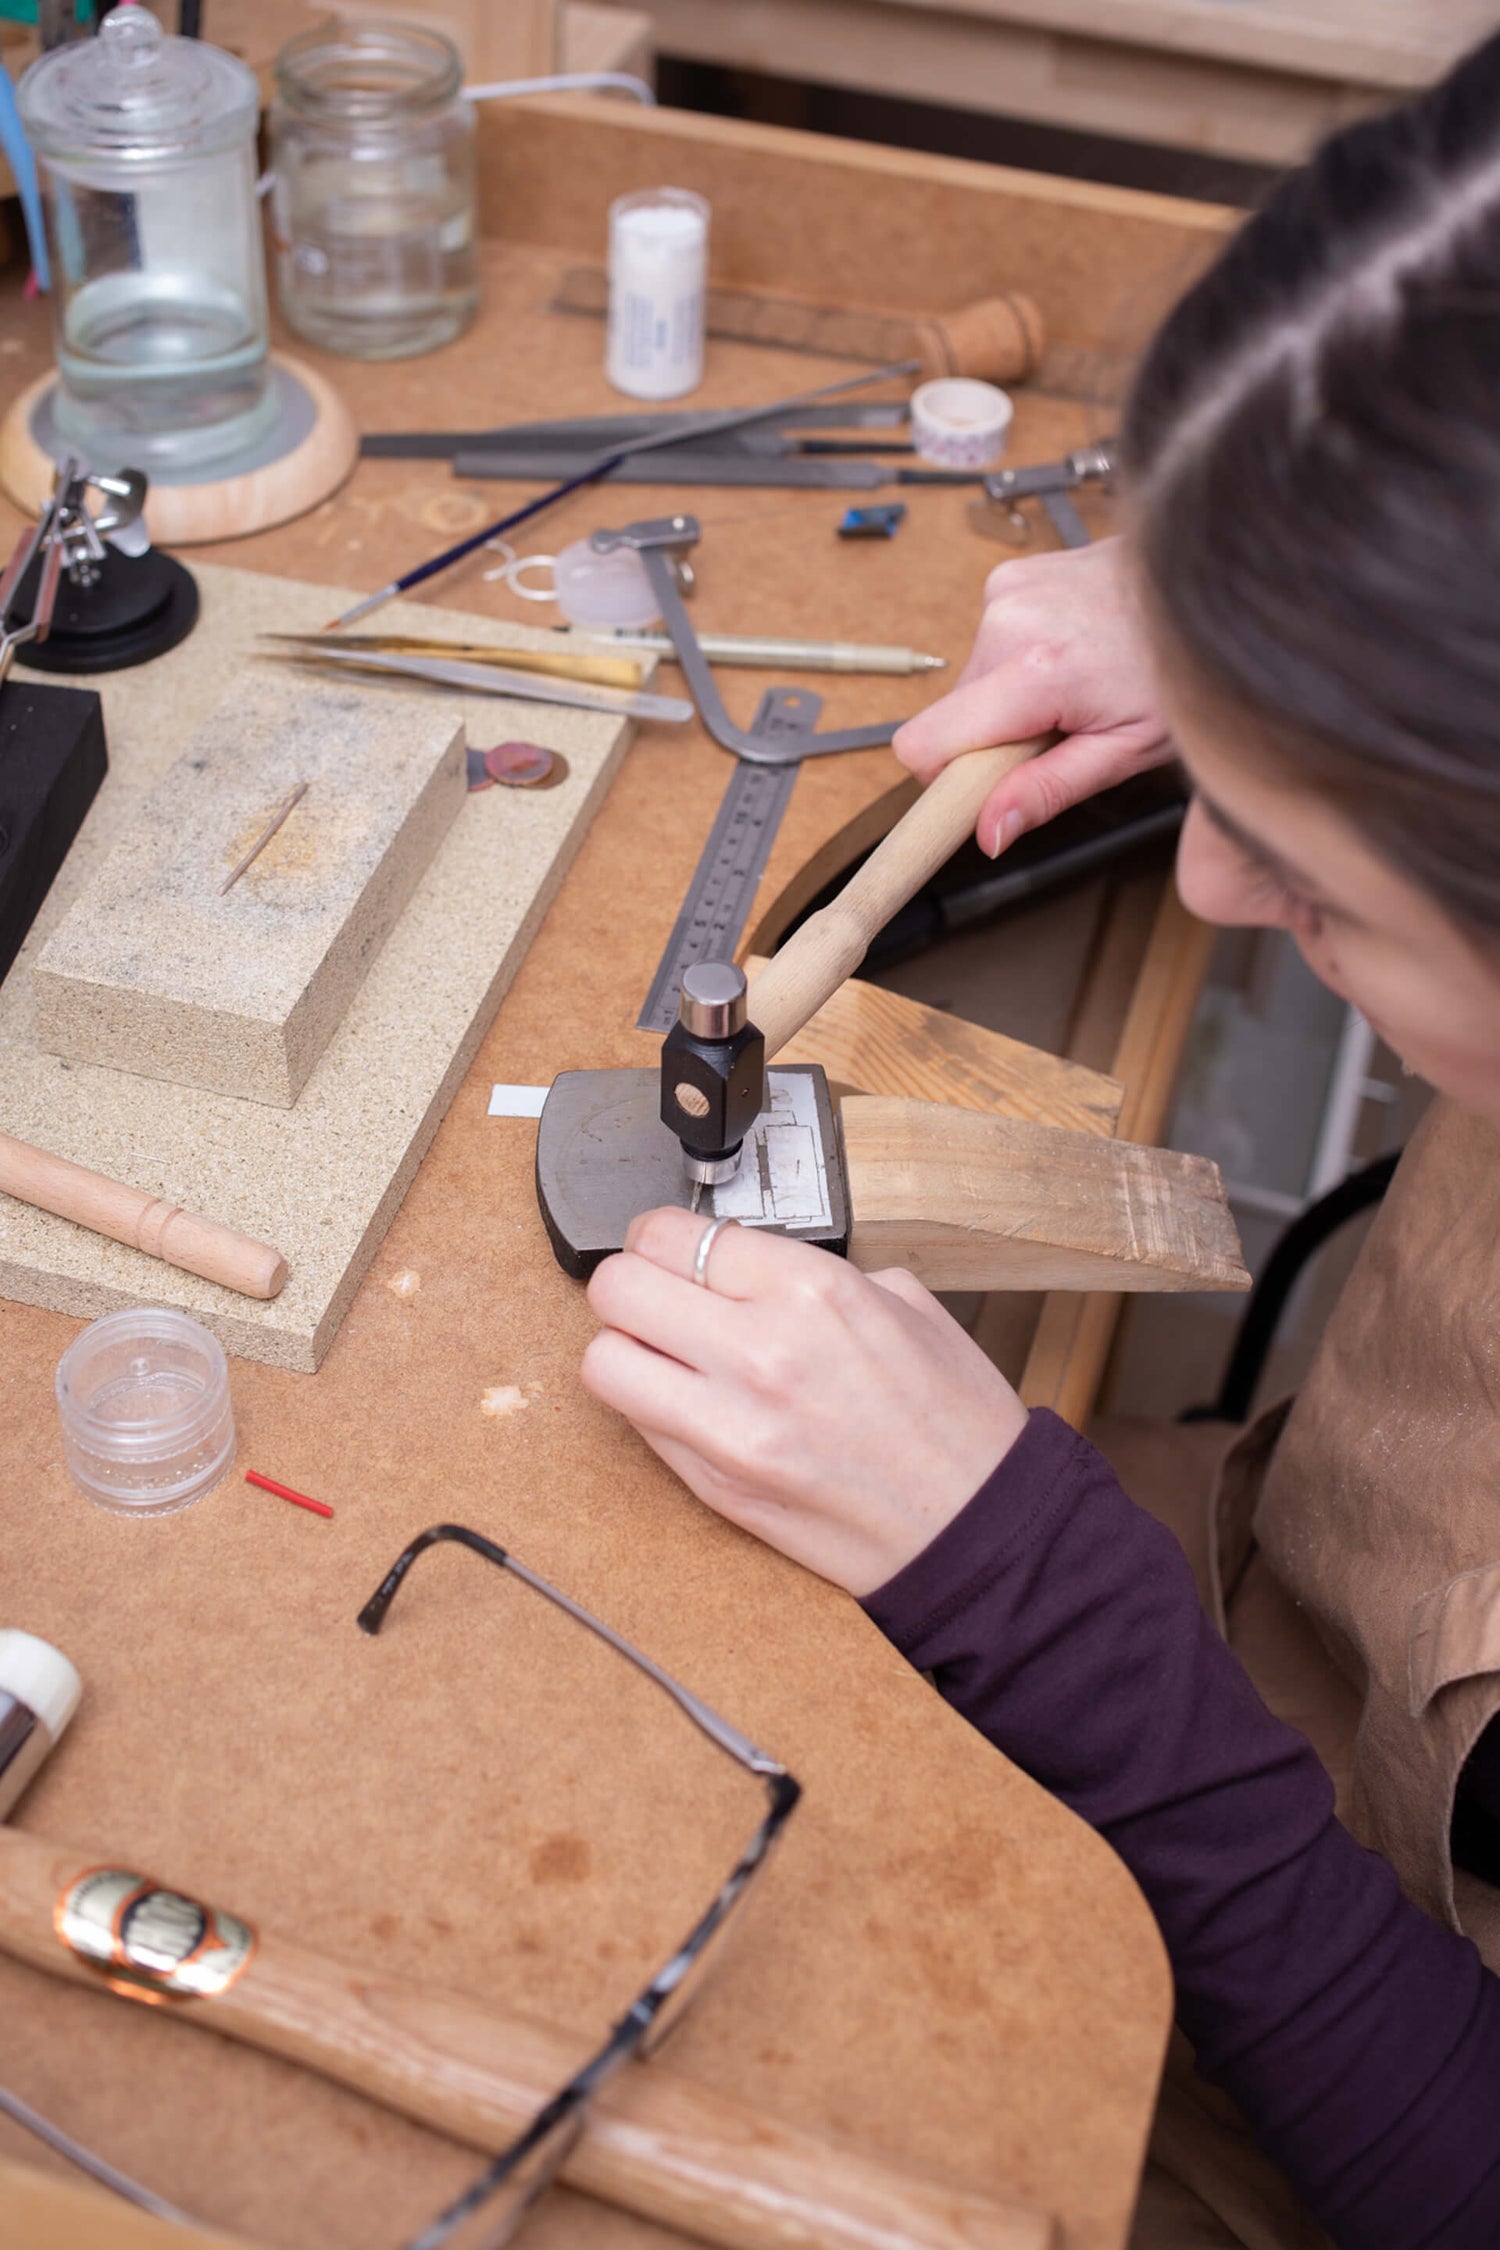 View of a jewellery bench from above with files and tools. A woman hammers a piece of silver.